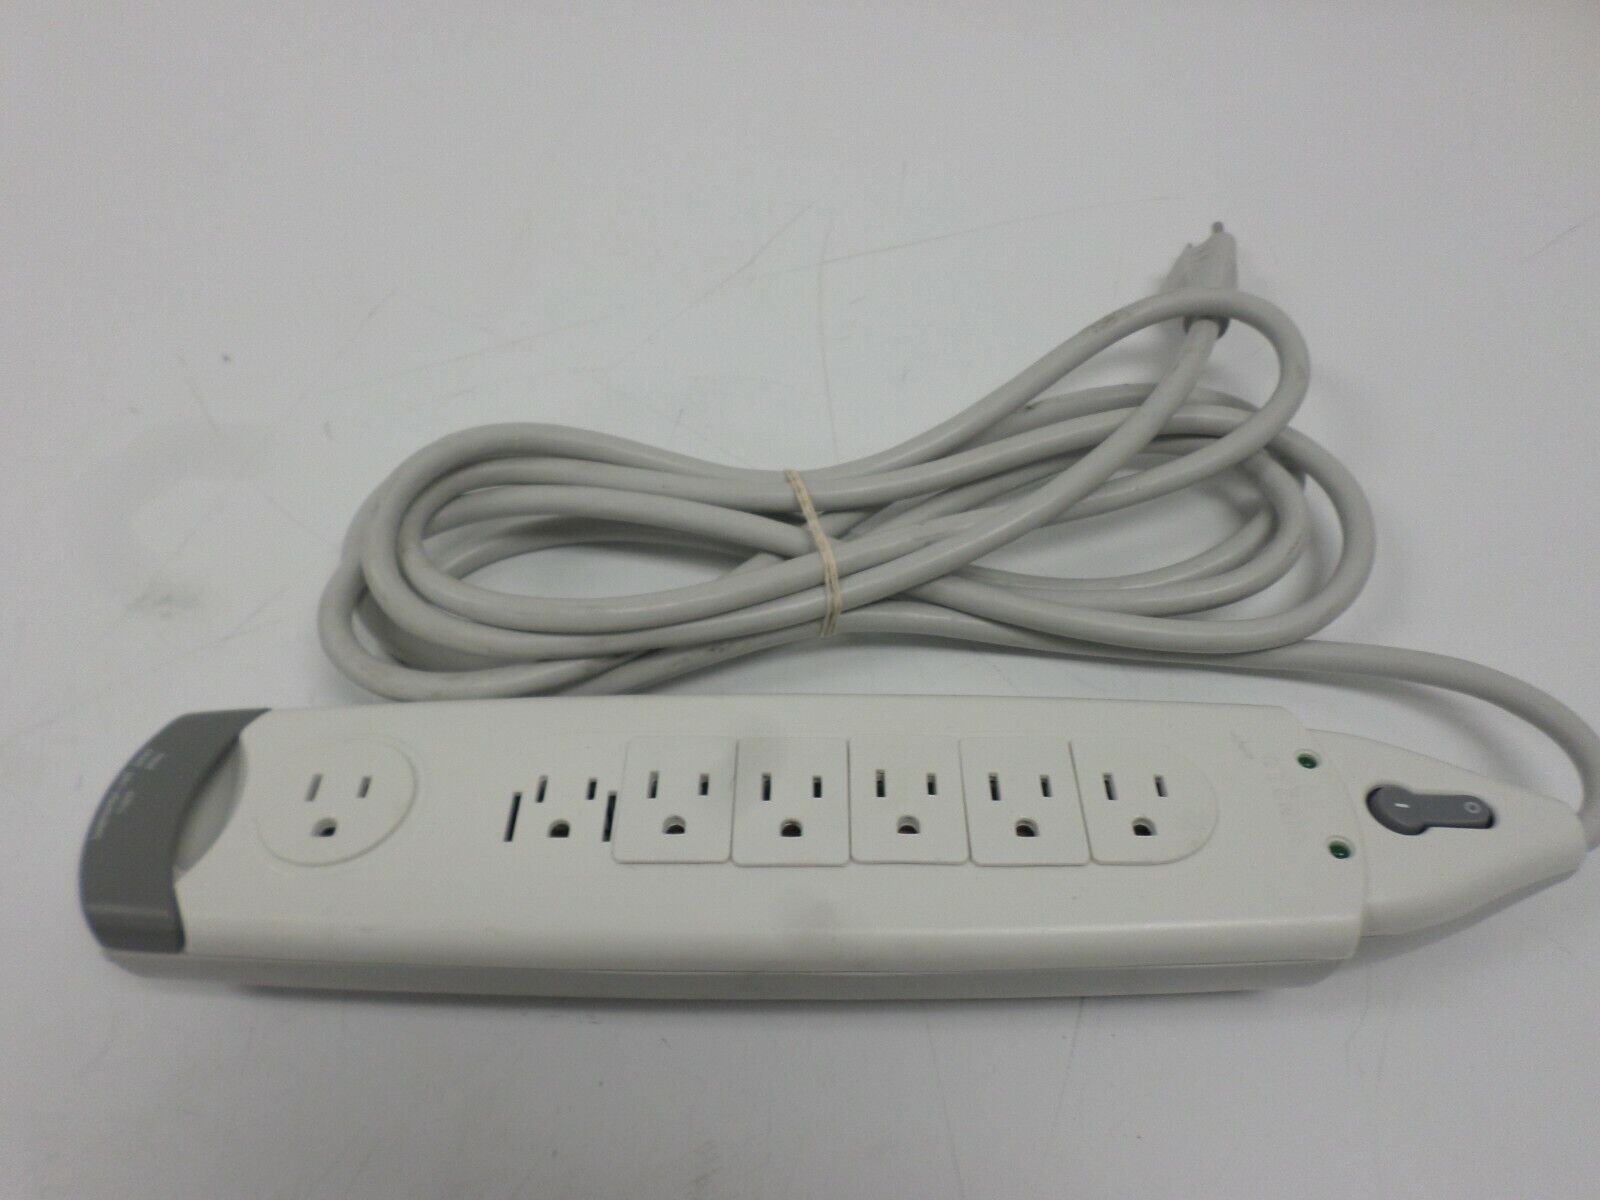 Belkin SurgeMaster Surge Protector F9H710-12, 7 Outlet, 12' Cord